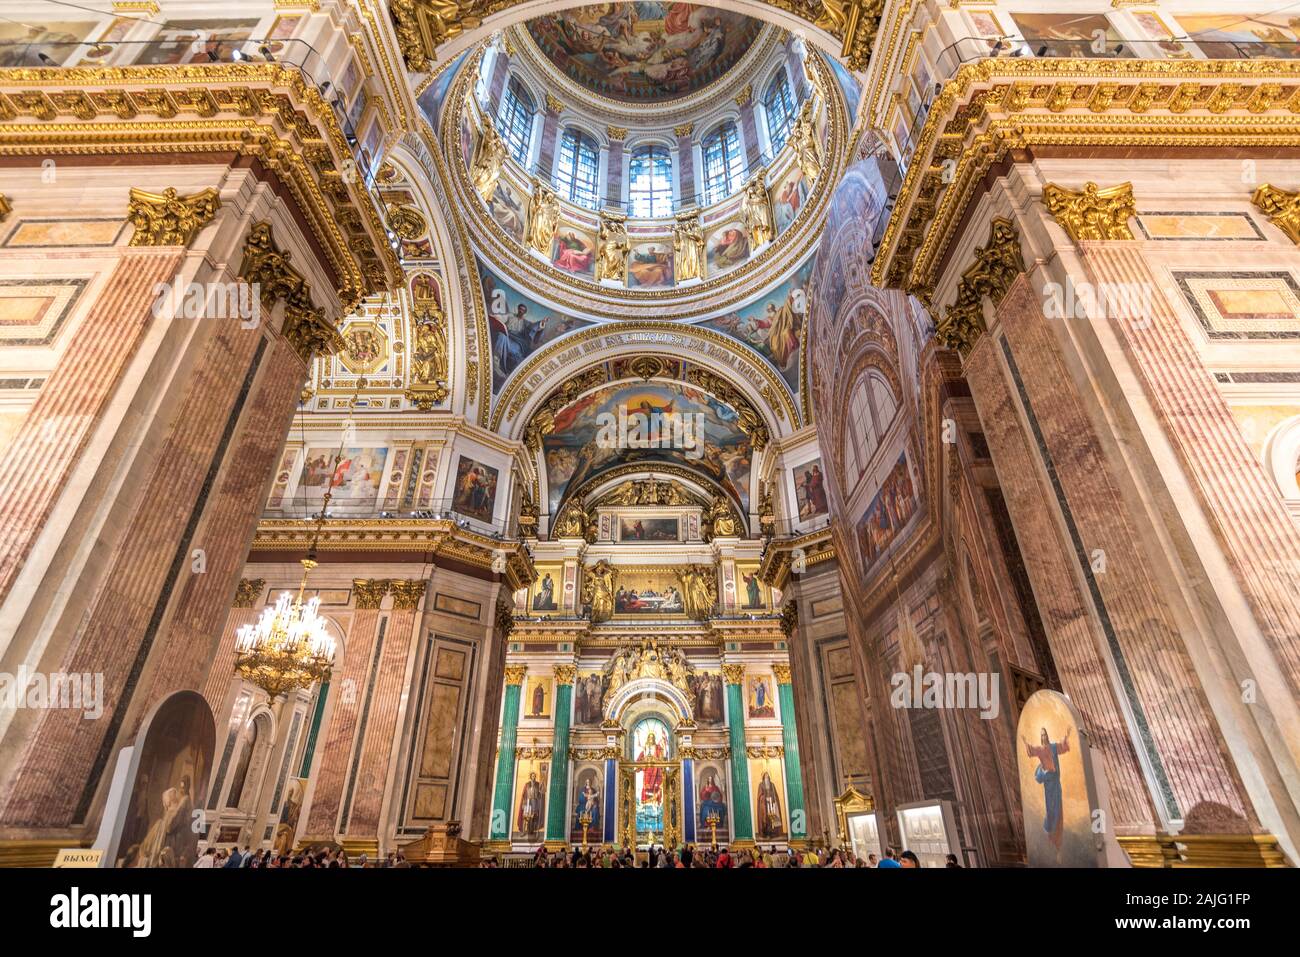 Saint Petersburg, Russia: Interior of Saint Isaac's Cathedral the largest Russian Orthodox cathedral in St Petersburg Stock Photo